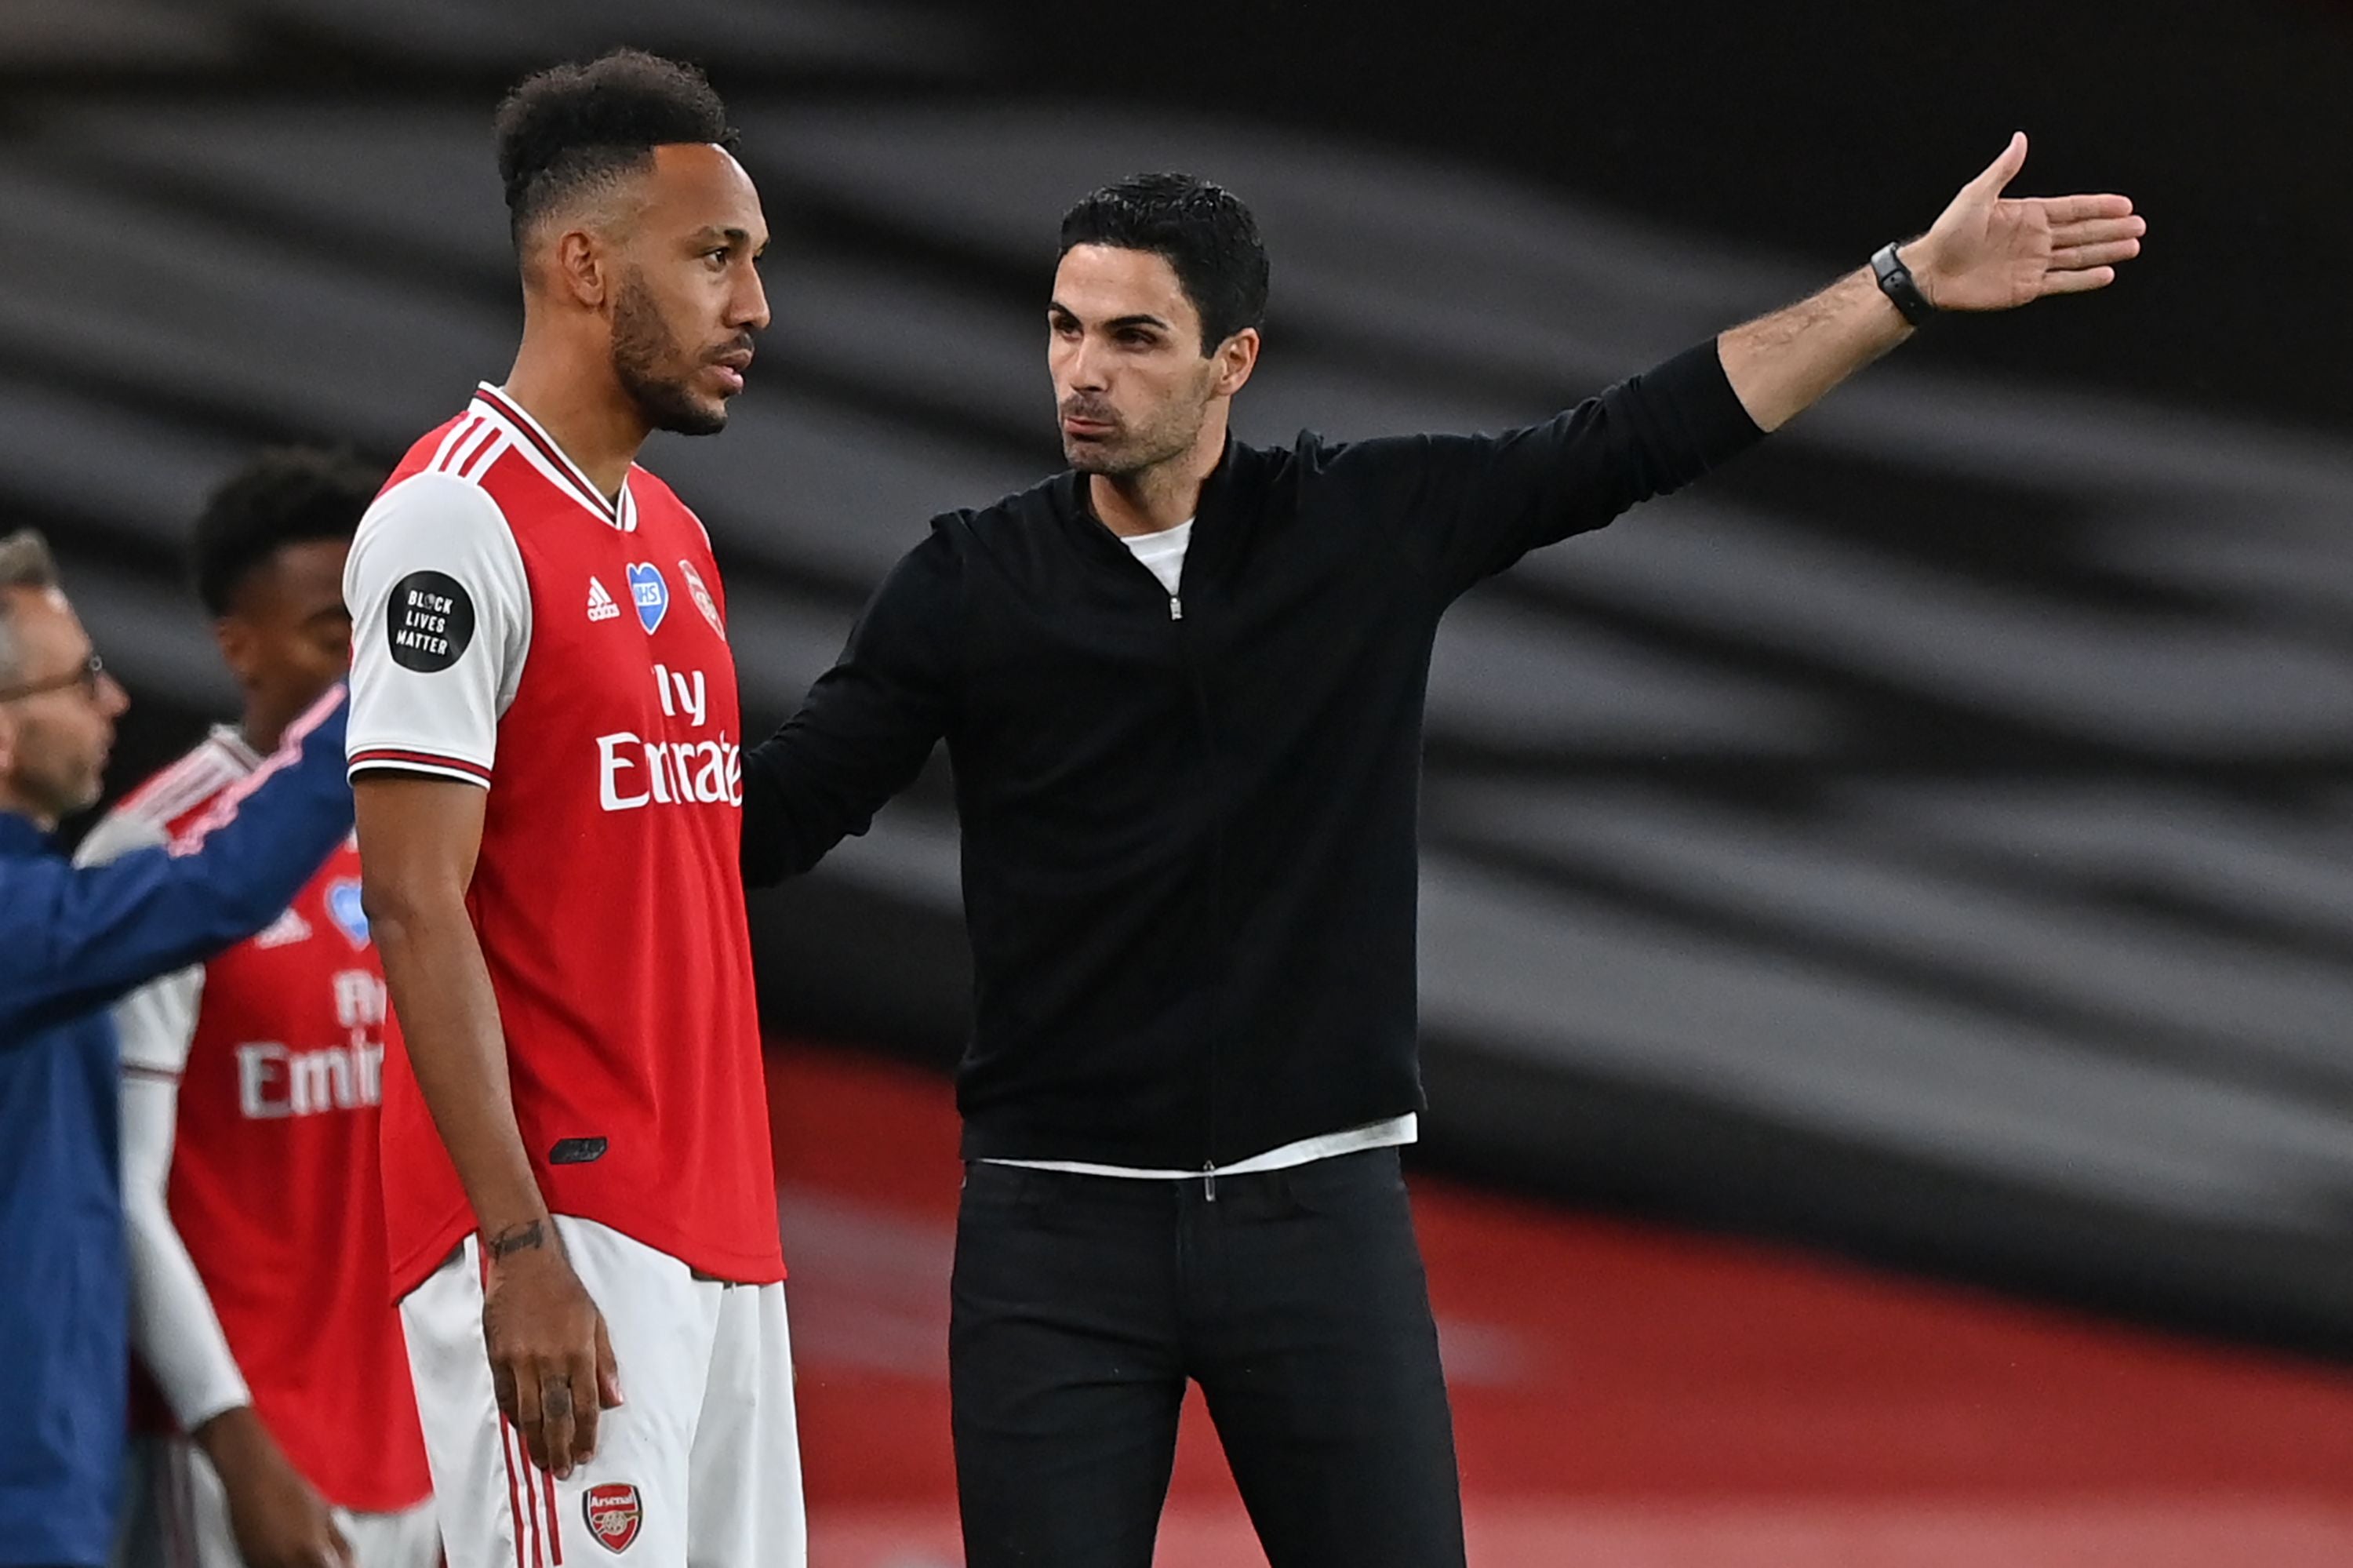 Mikel Arteta has given Arsenal clearer direction